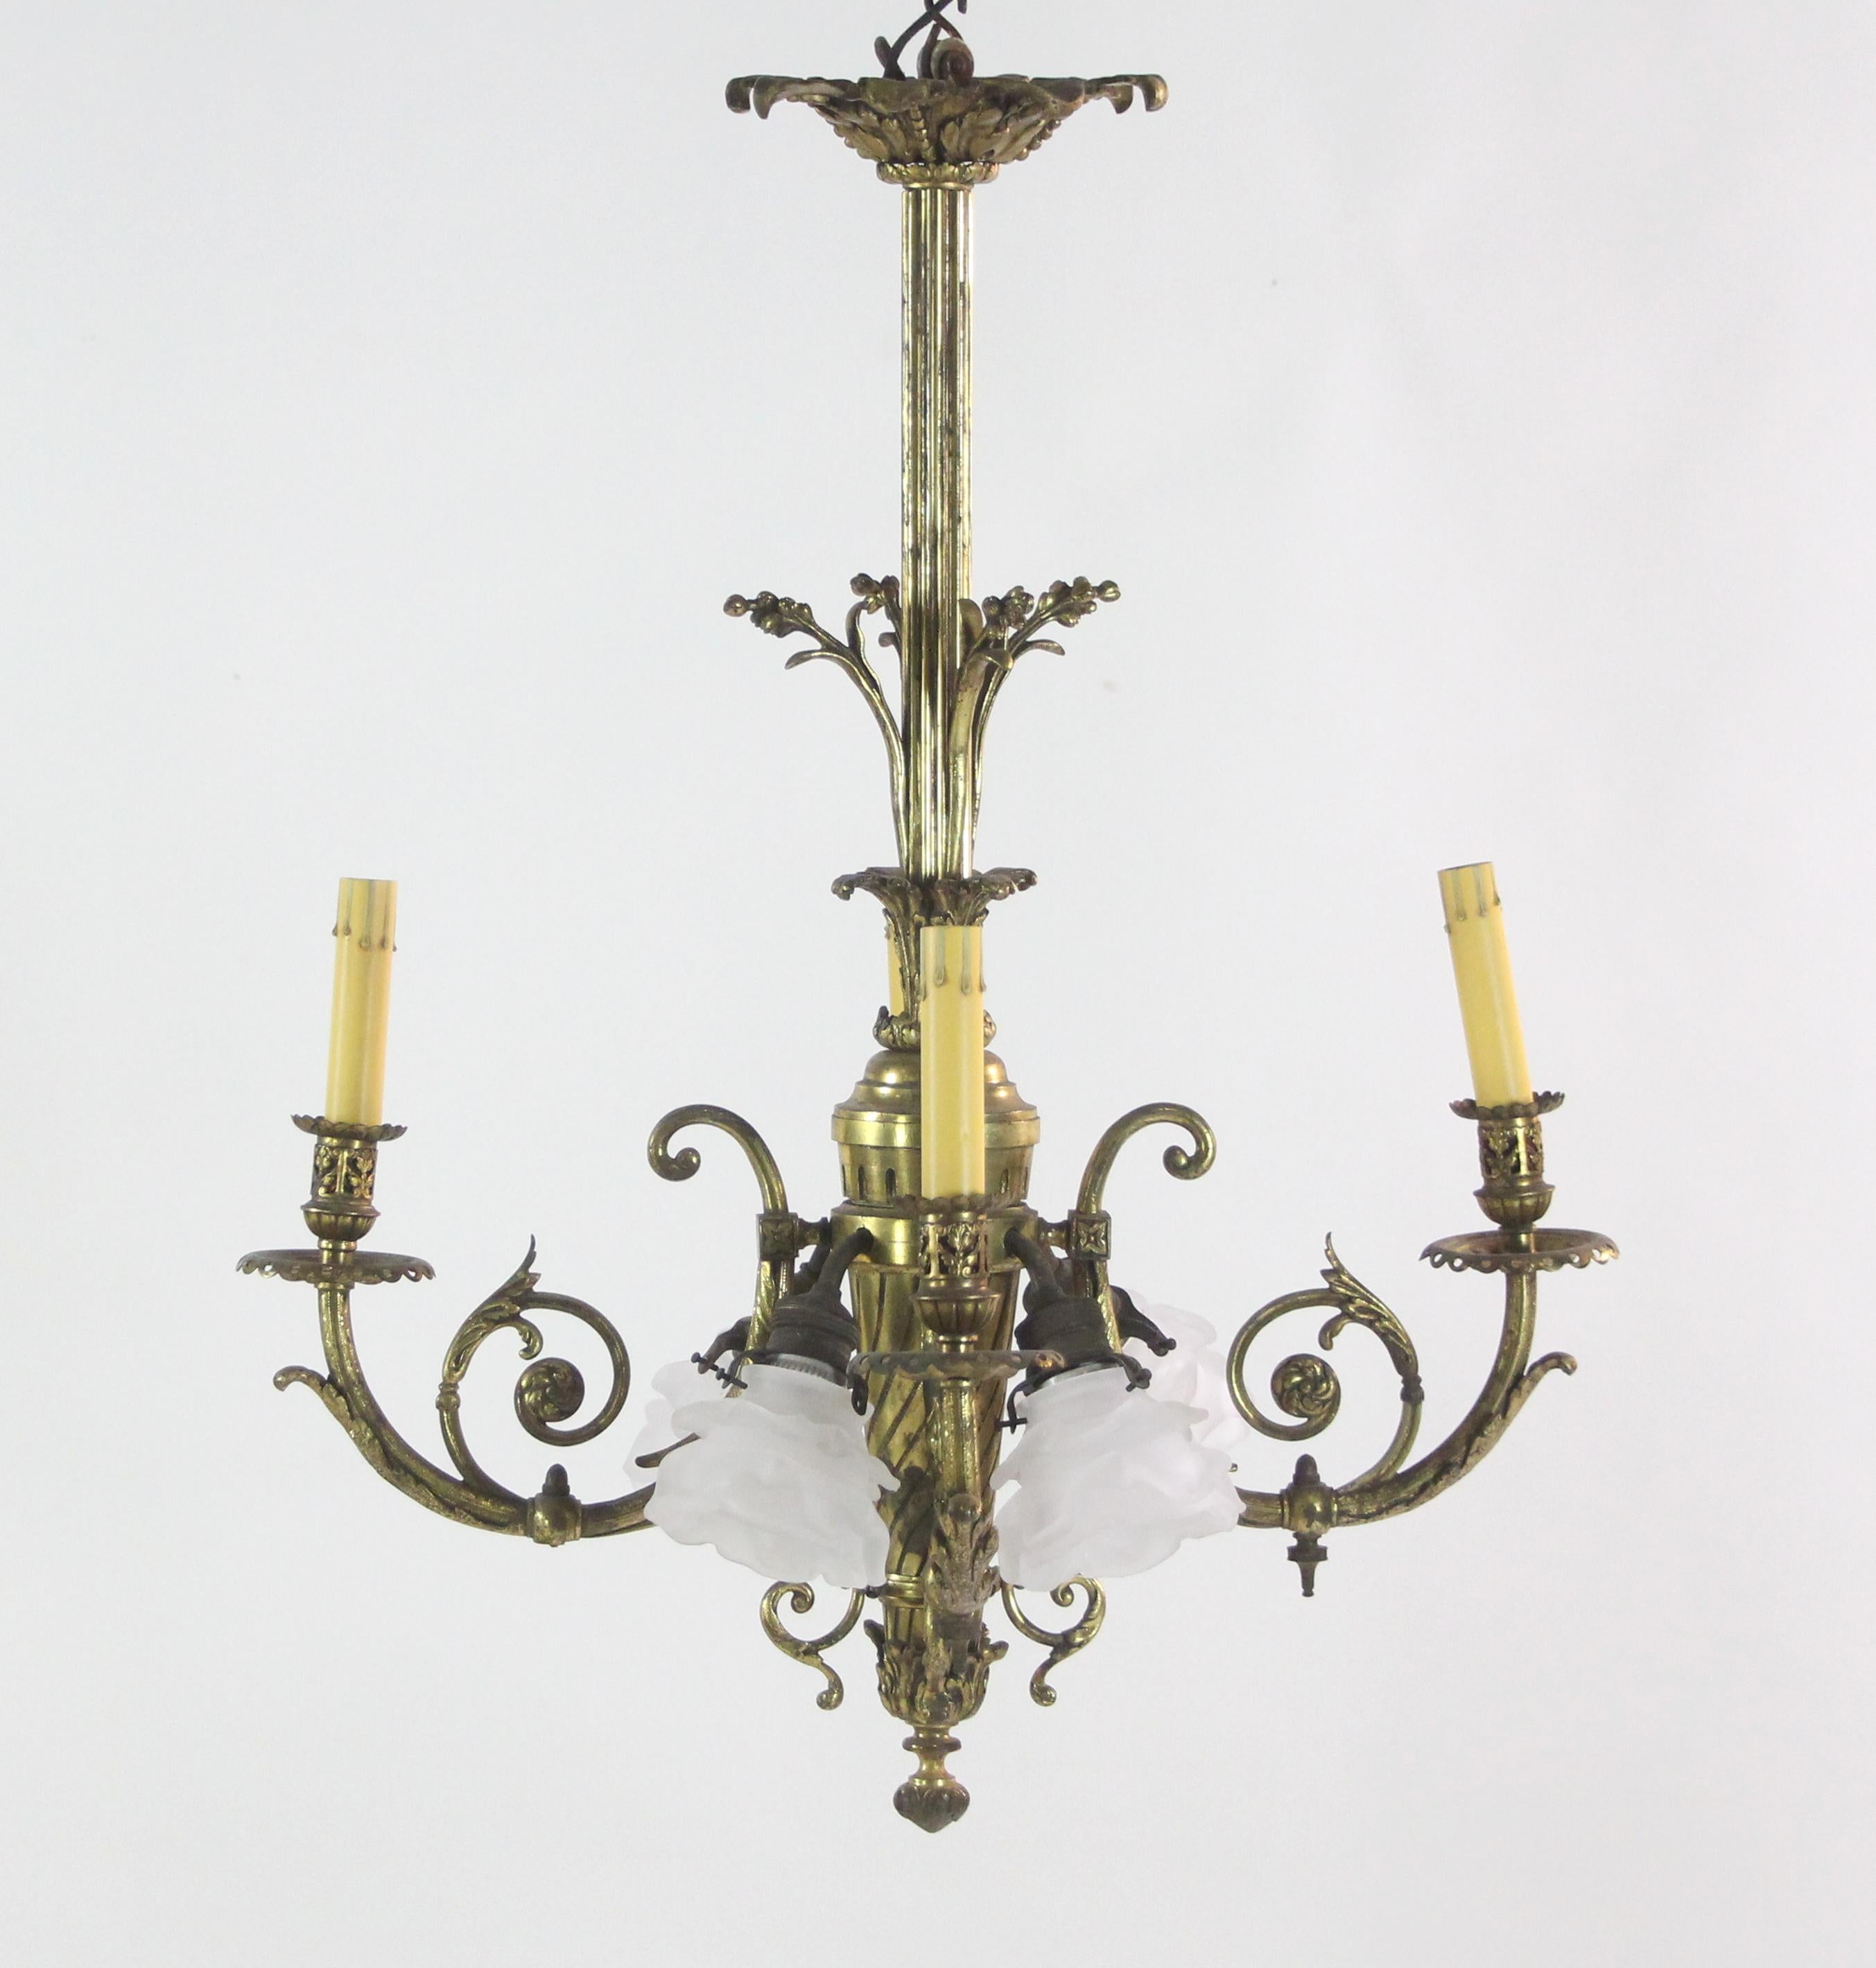 19th century French cast bronze chandelier with foliate details. It features four candlestick arms and four down lights with frosted floral shades, making eight lights total. This can be seen at our 400 Gilligan St location in Scranton, PA.